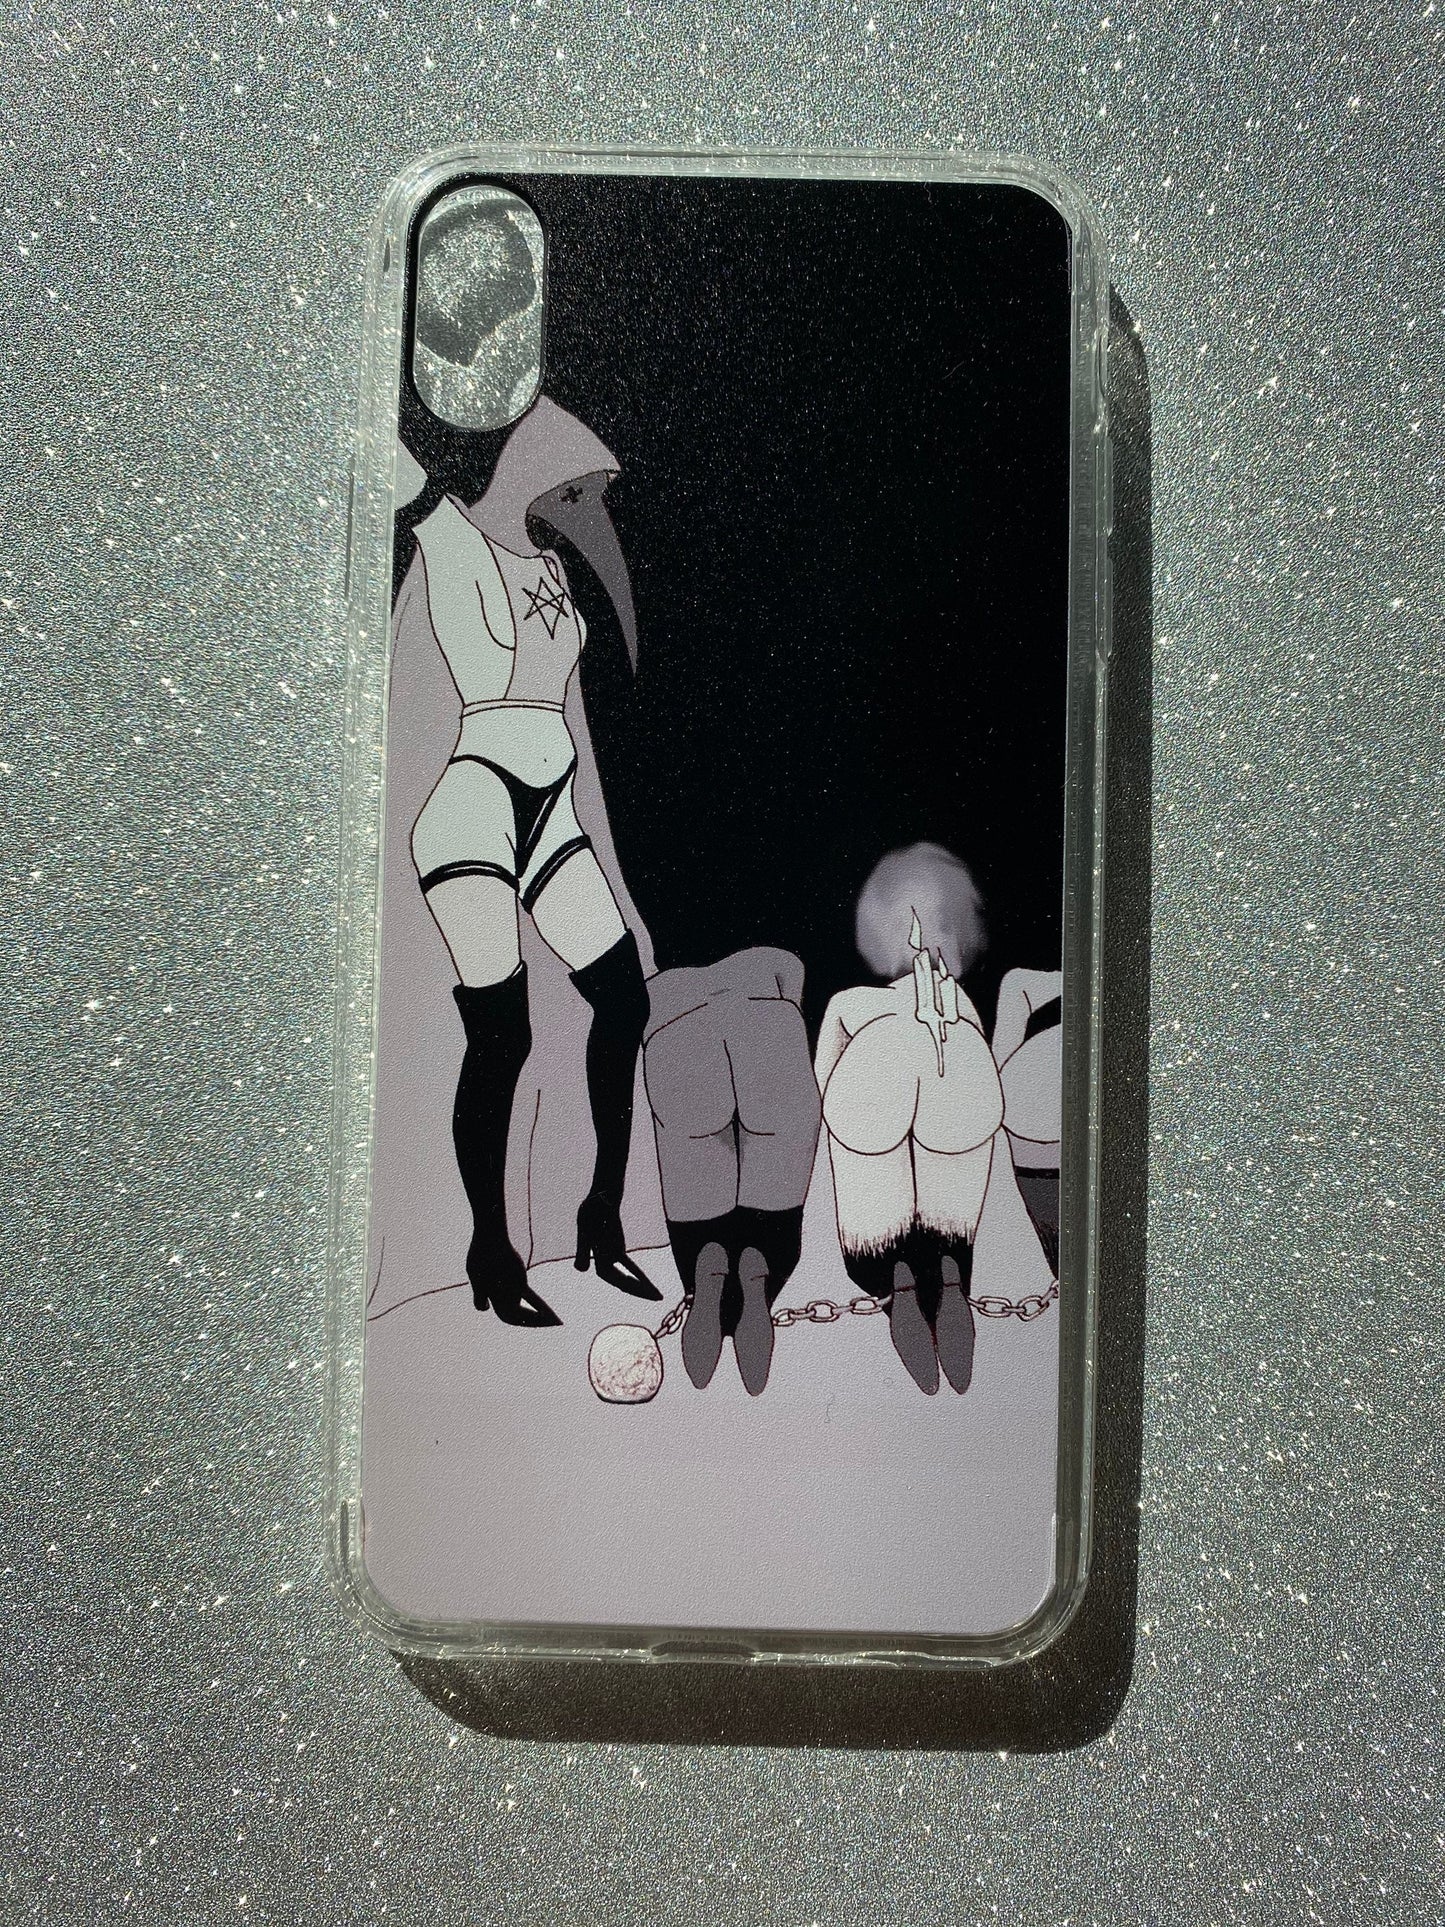 Get in Line Phone Case- available in most Iphones